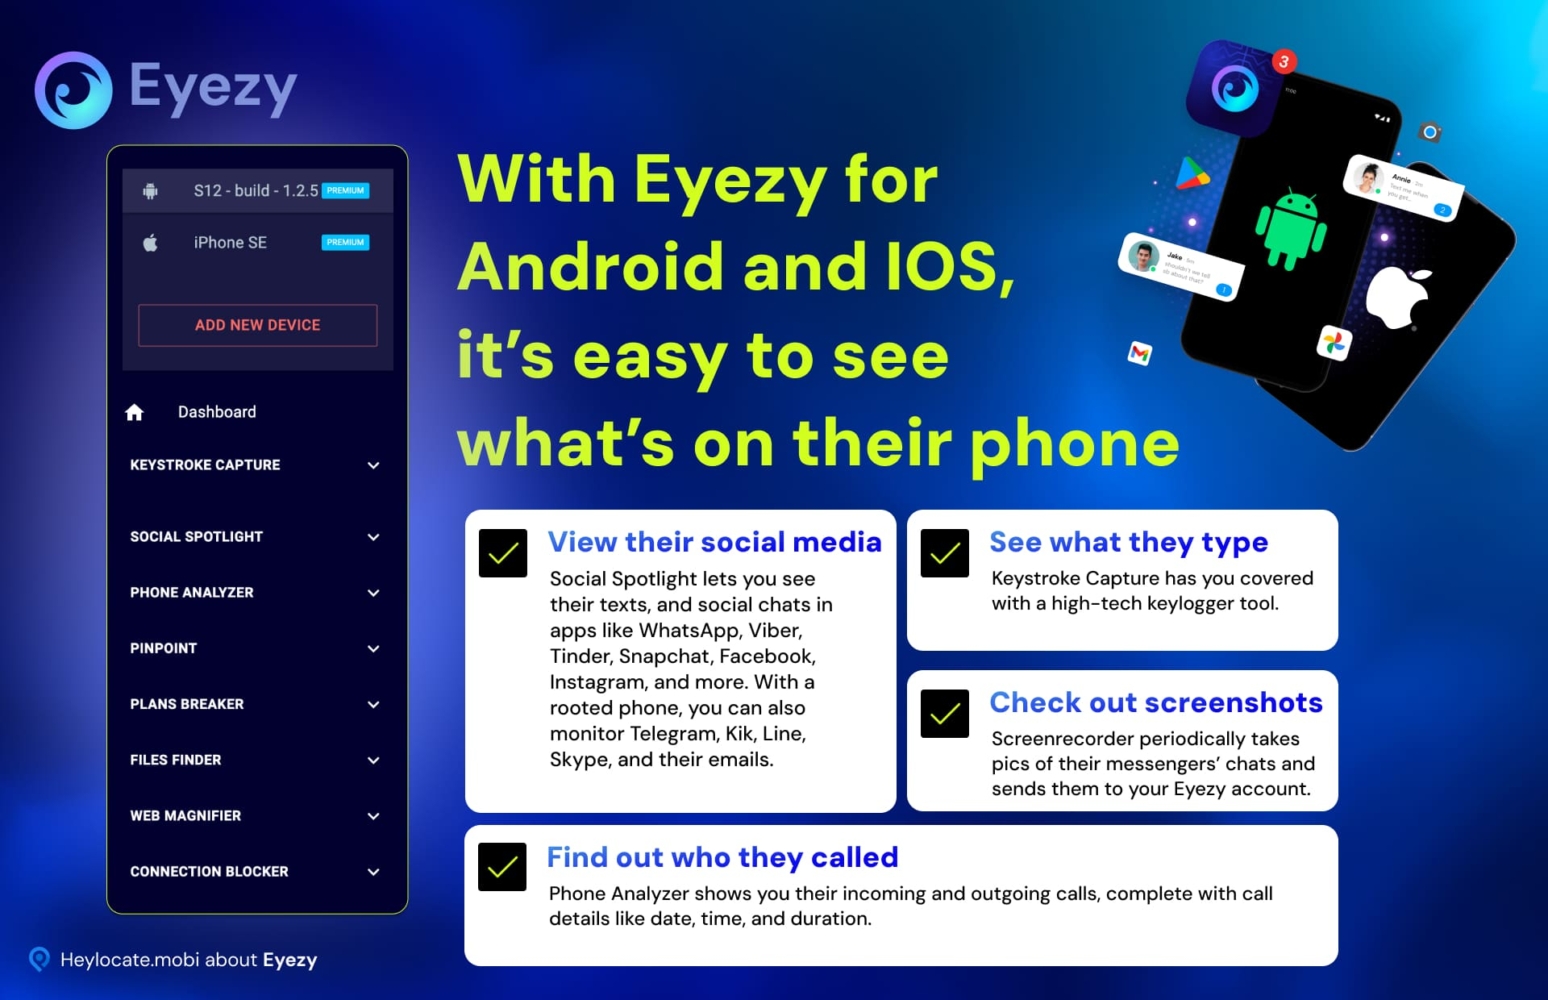 Collage highlighting Eyezy's monitoring features for Android and iOS devices, including viewing social media, keystroke capture, screenshot checks, and call analysis.